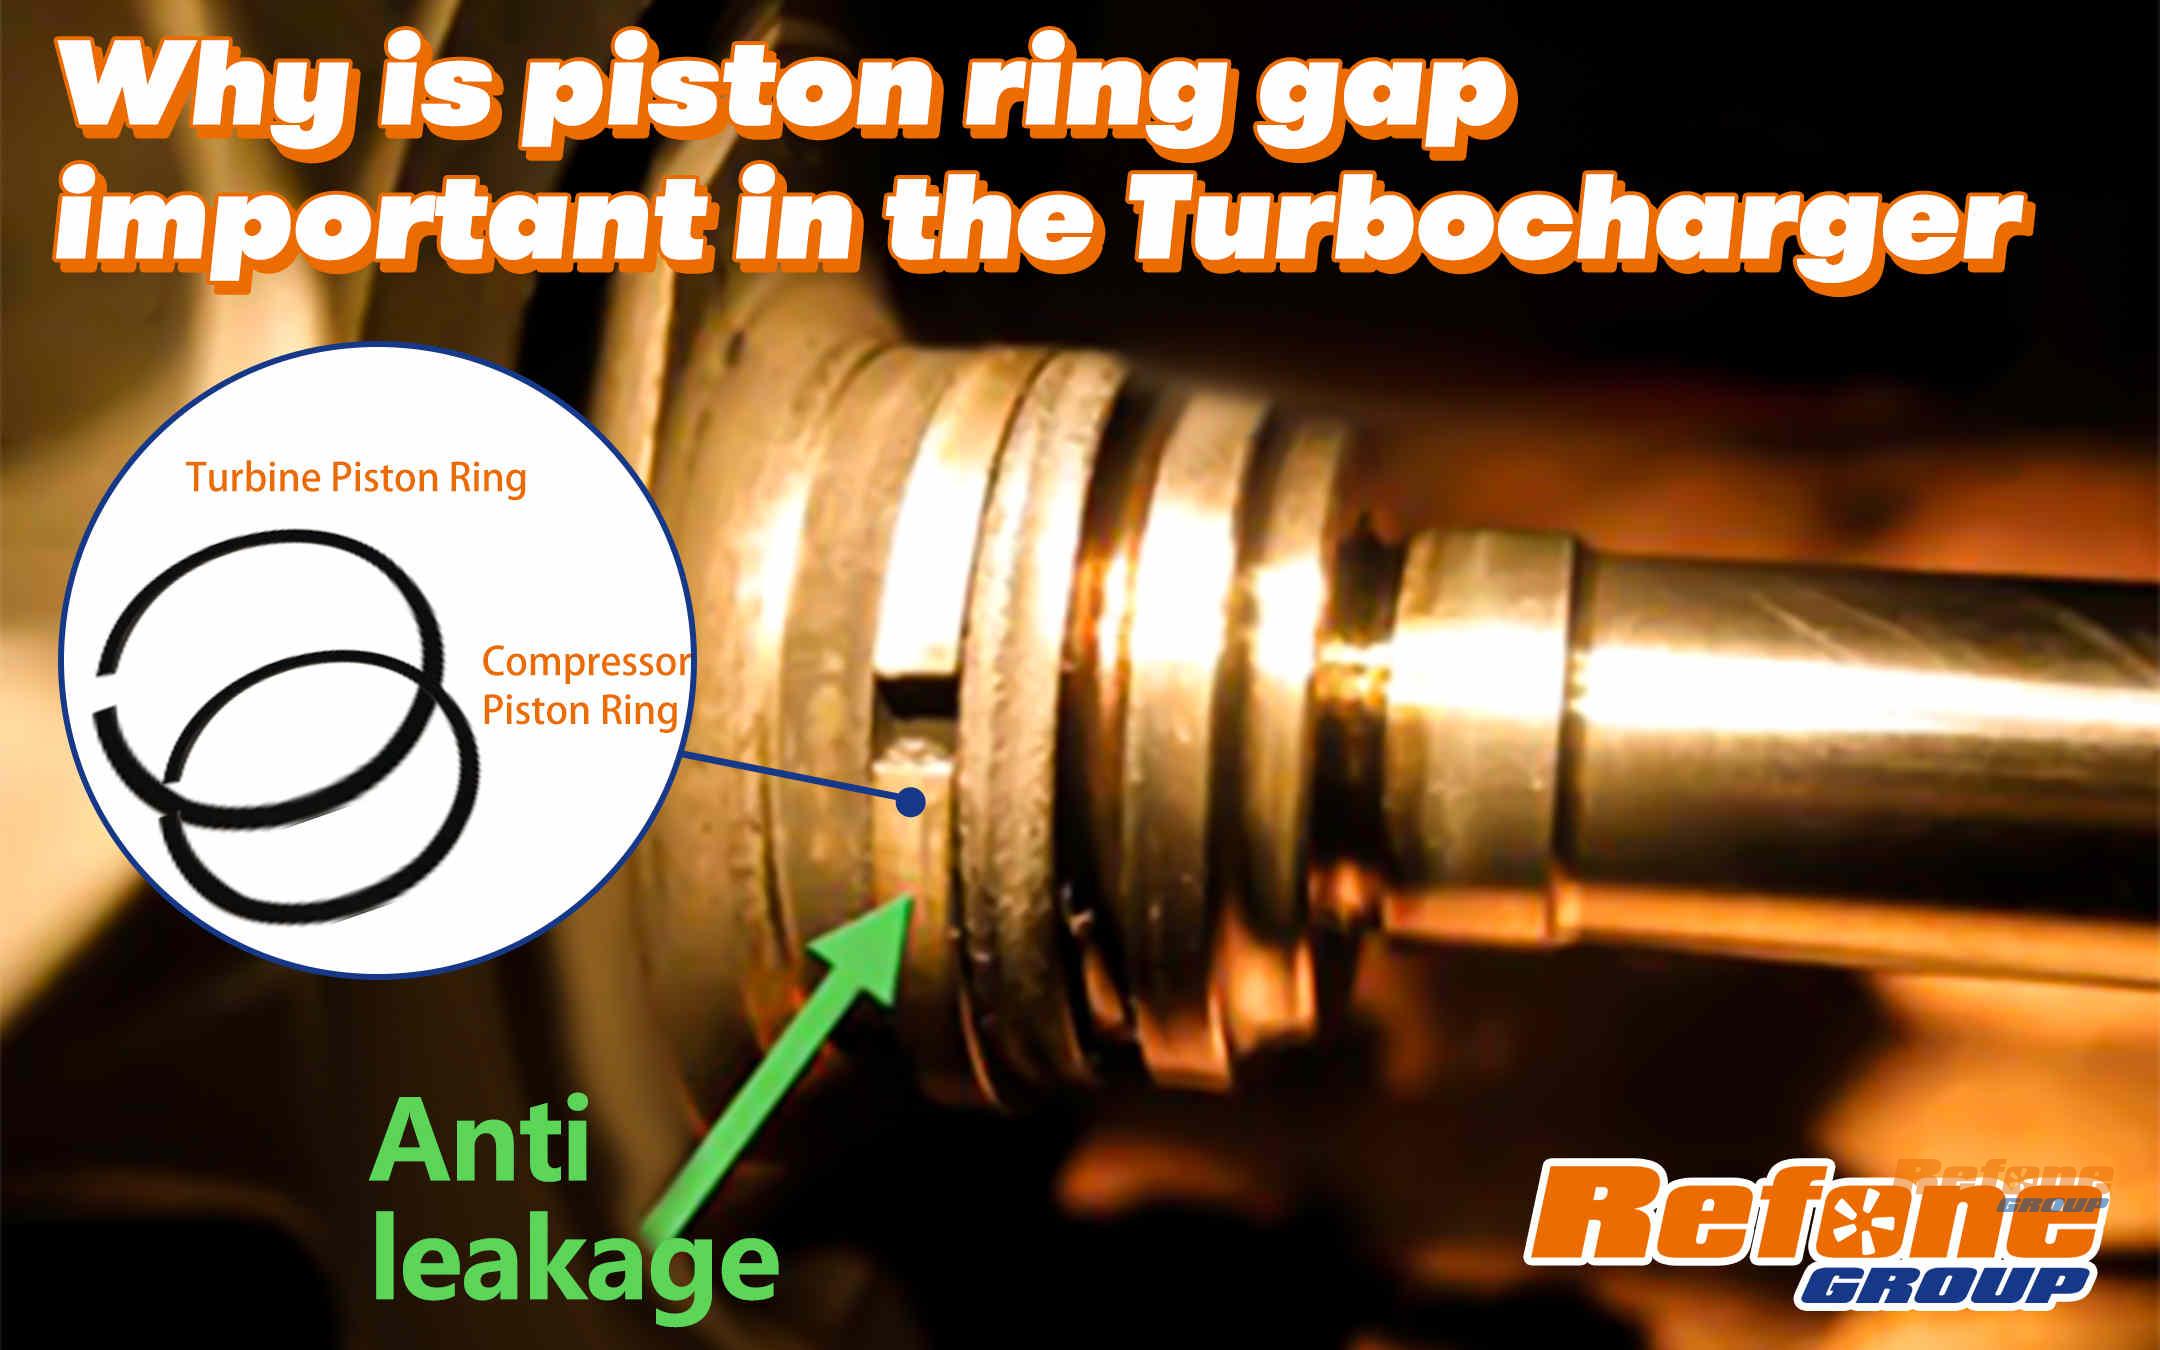 Why is piston ring gap important in the Turbocharger?